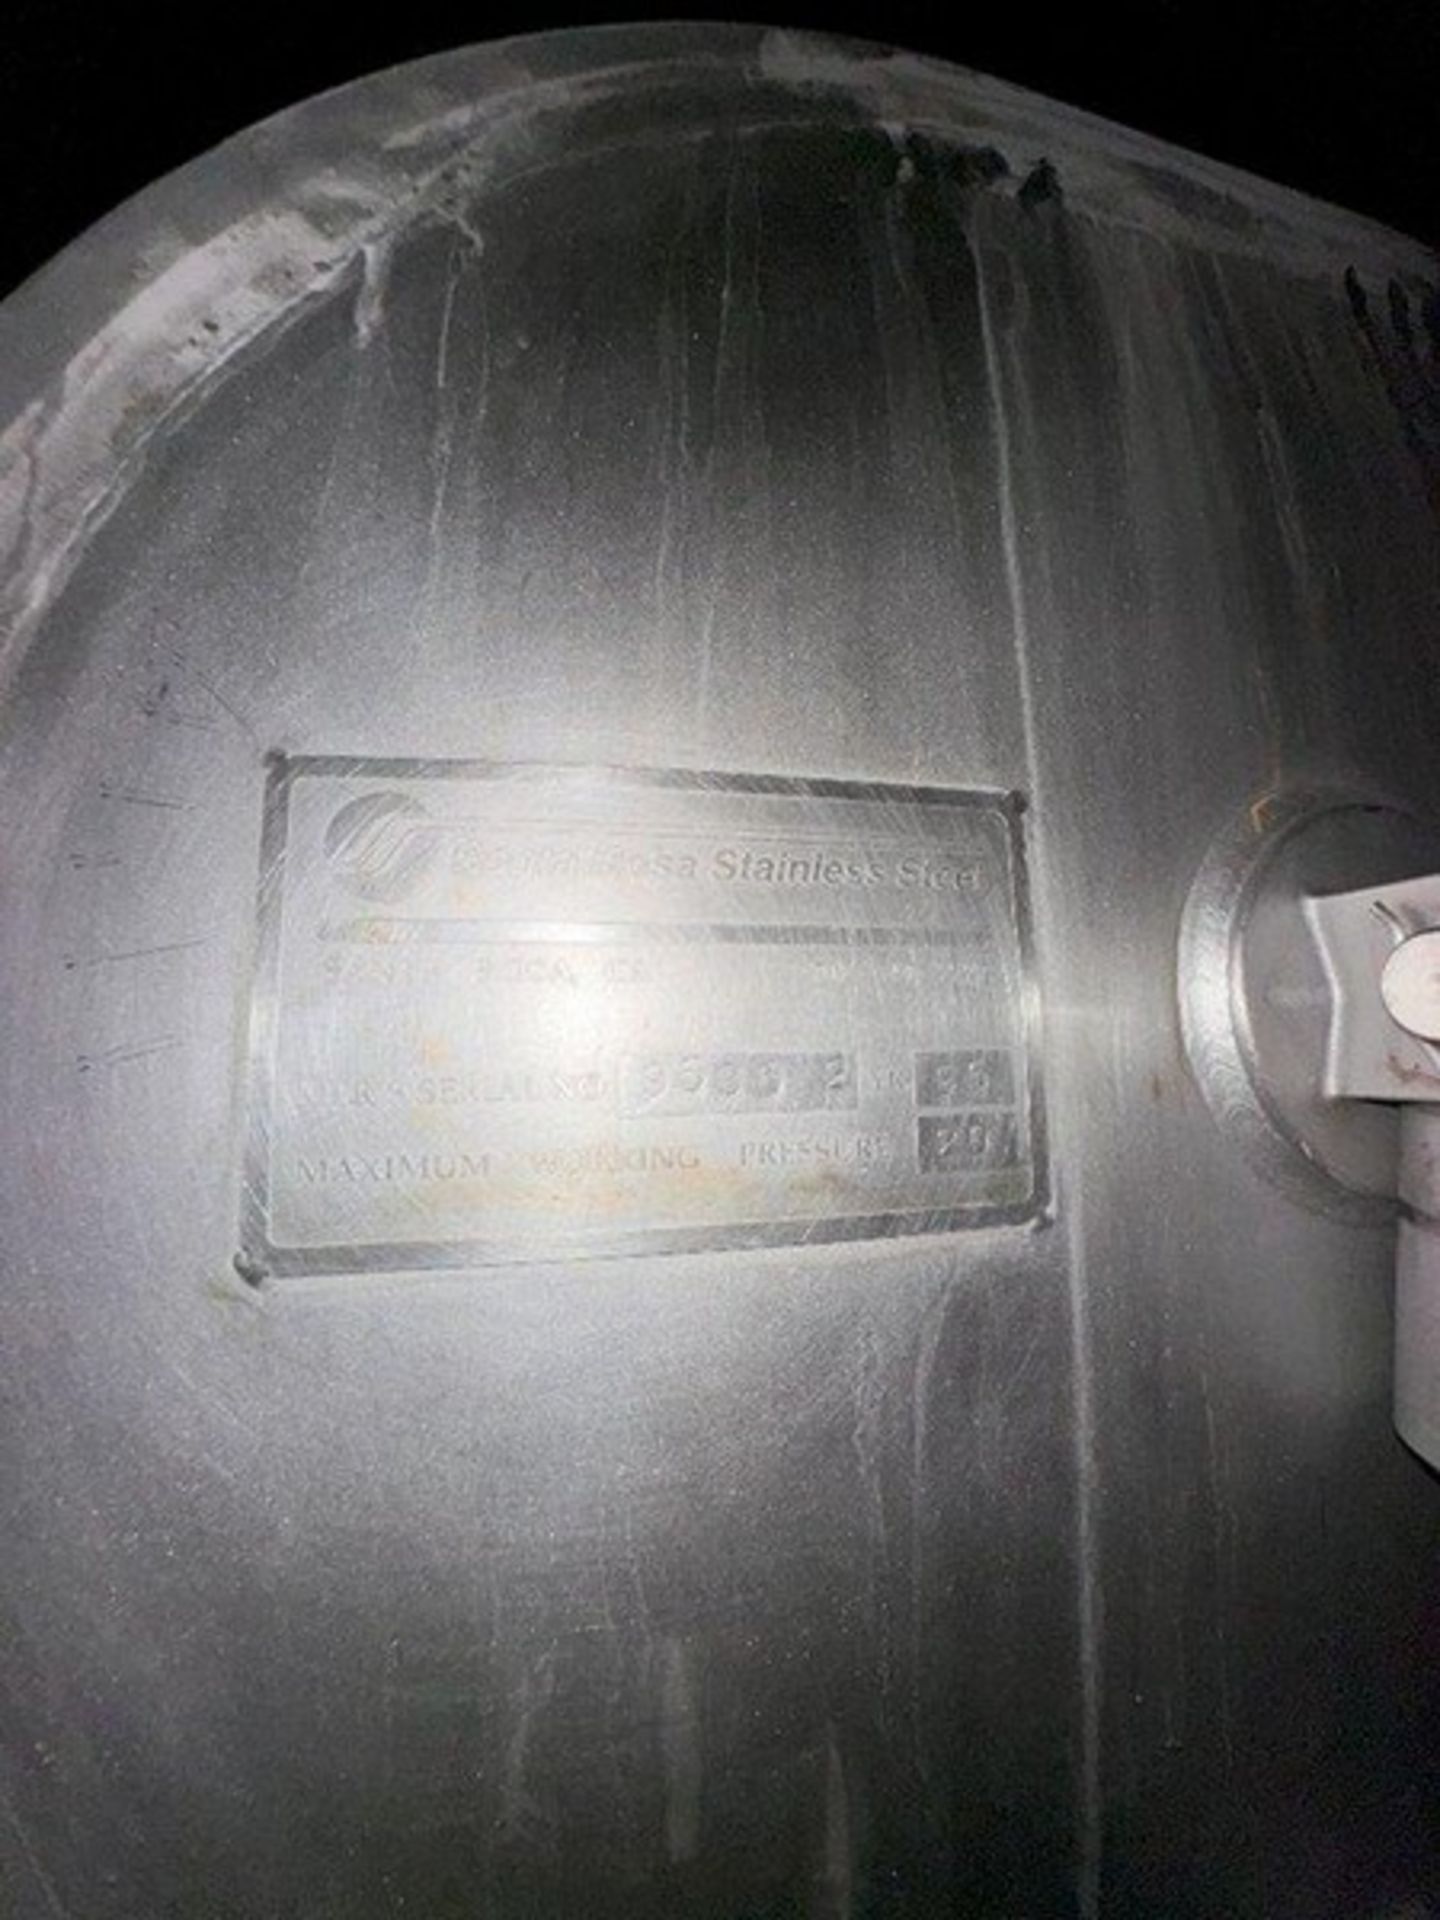 150 BBL (4650 Gallon) Vertical Cone Bottom 304 Stainless Steel Jacketed Vessel. Manufactured by Sant - Image 4 of 7